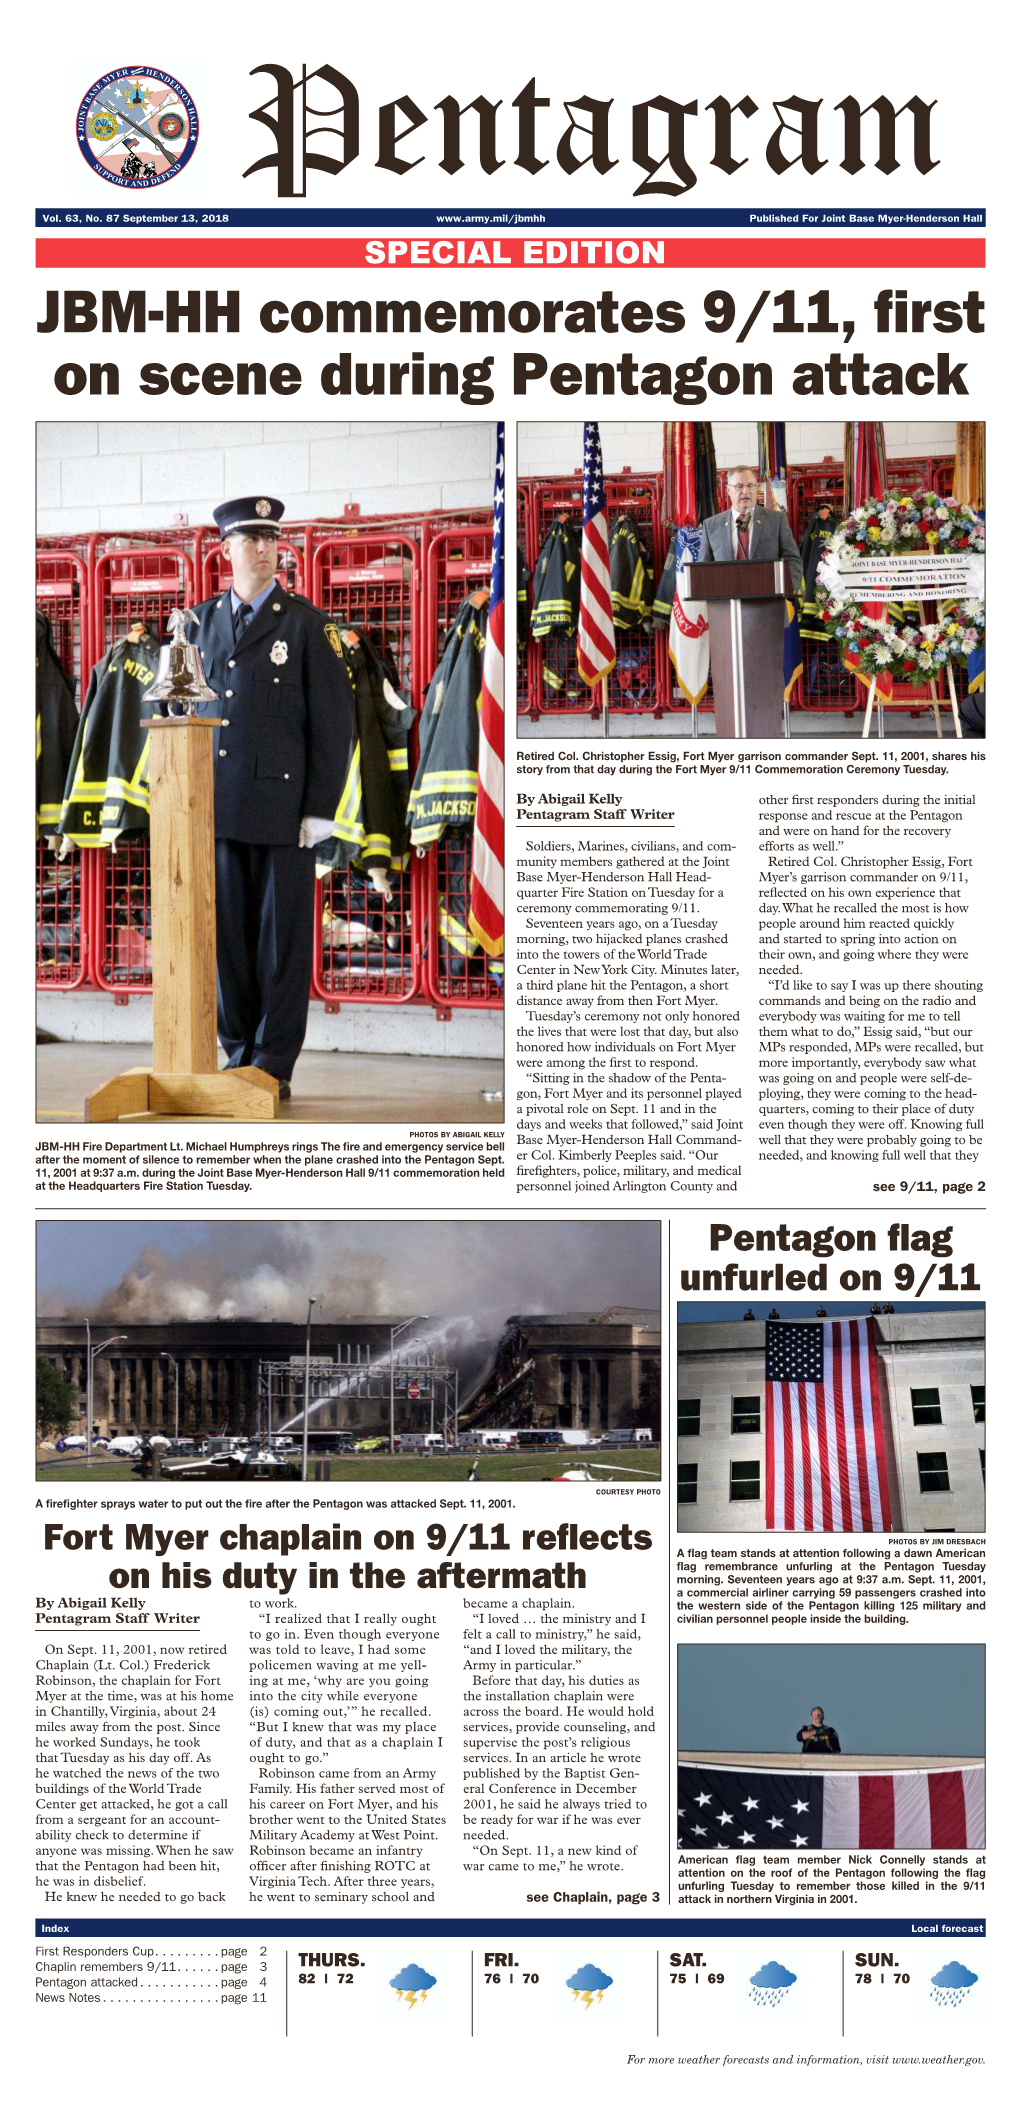 JBM-HH Commemorates 9/11, First on Scene During Pentagon Attack